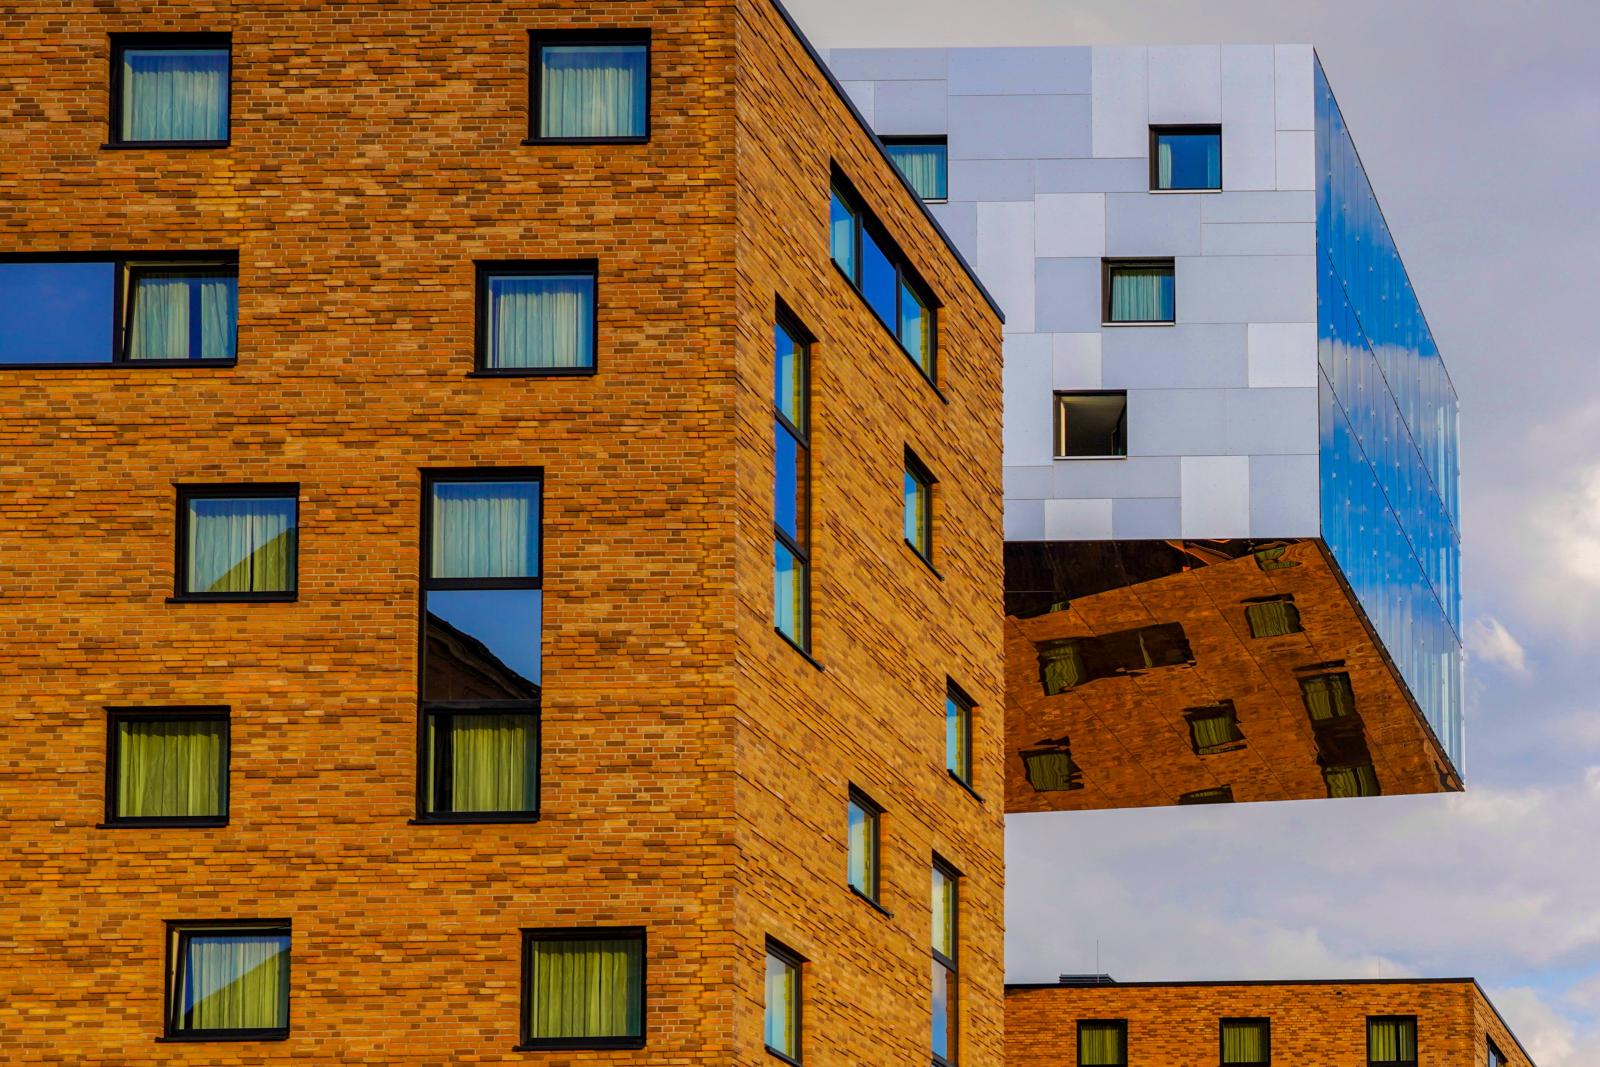 Harmony in Contrast: Highly reflective Aluminium Cladding | Buy this image